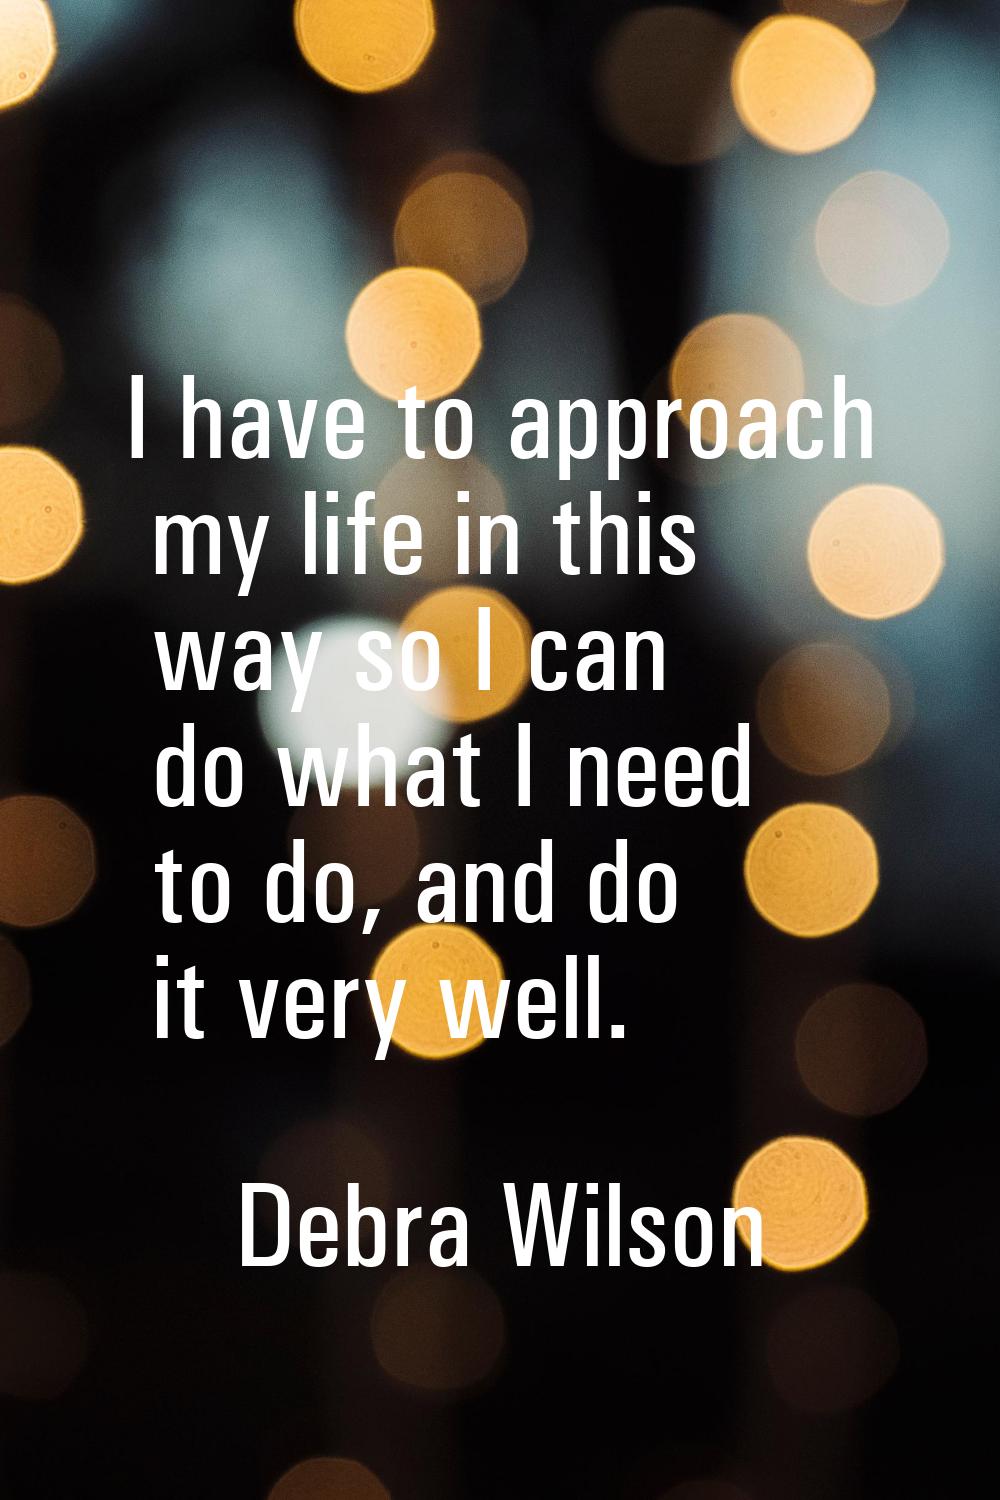 I have to approach my life in this way so I can do what I need to do, and do it very well.